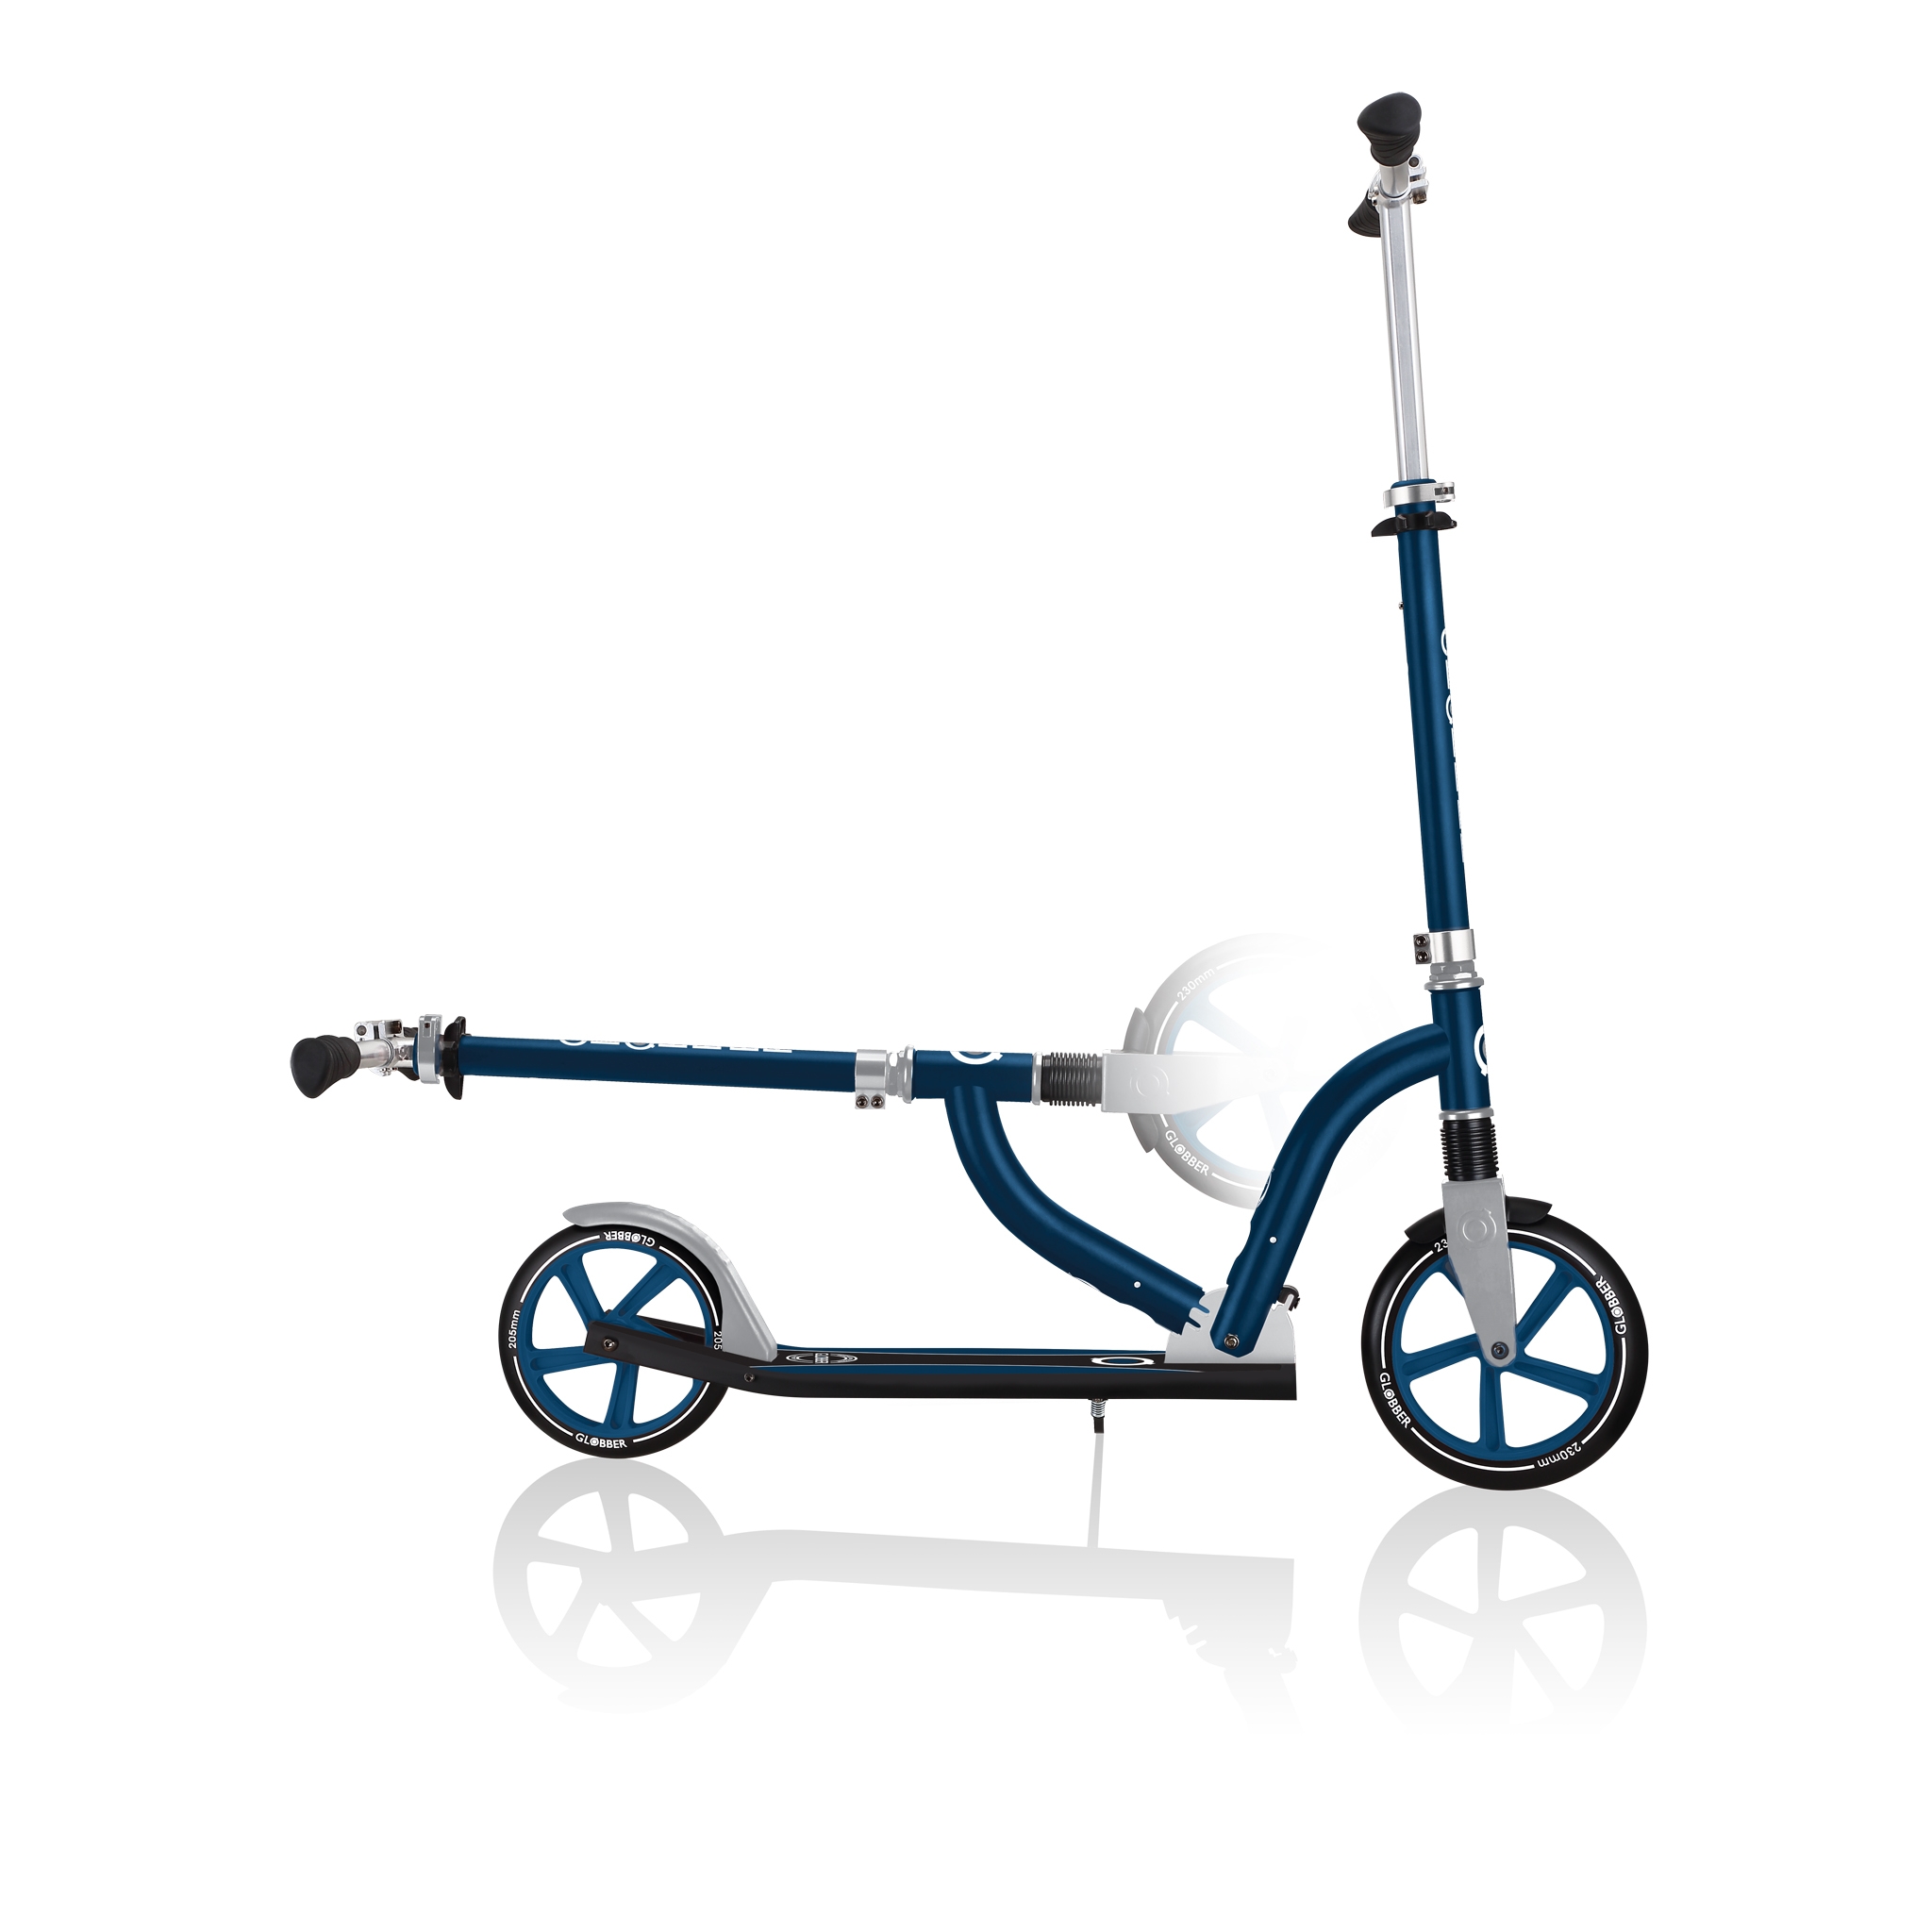 NL-230-205-DUO-folding-big-wheel-scooters-for-kids-and-teens 4